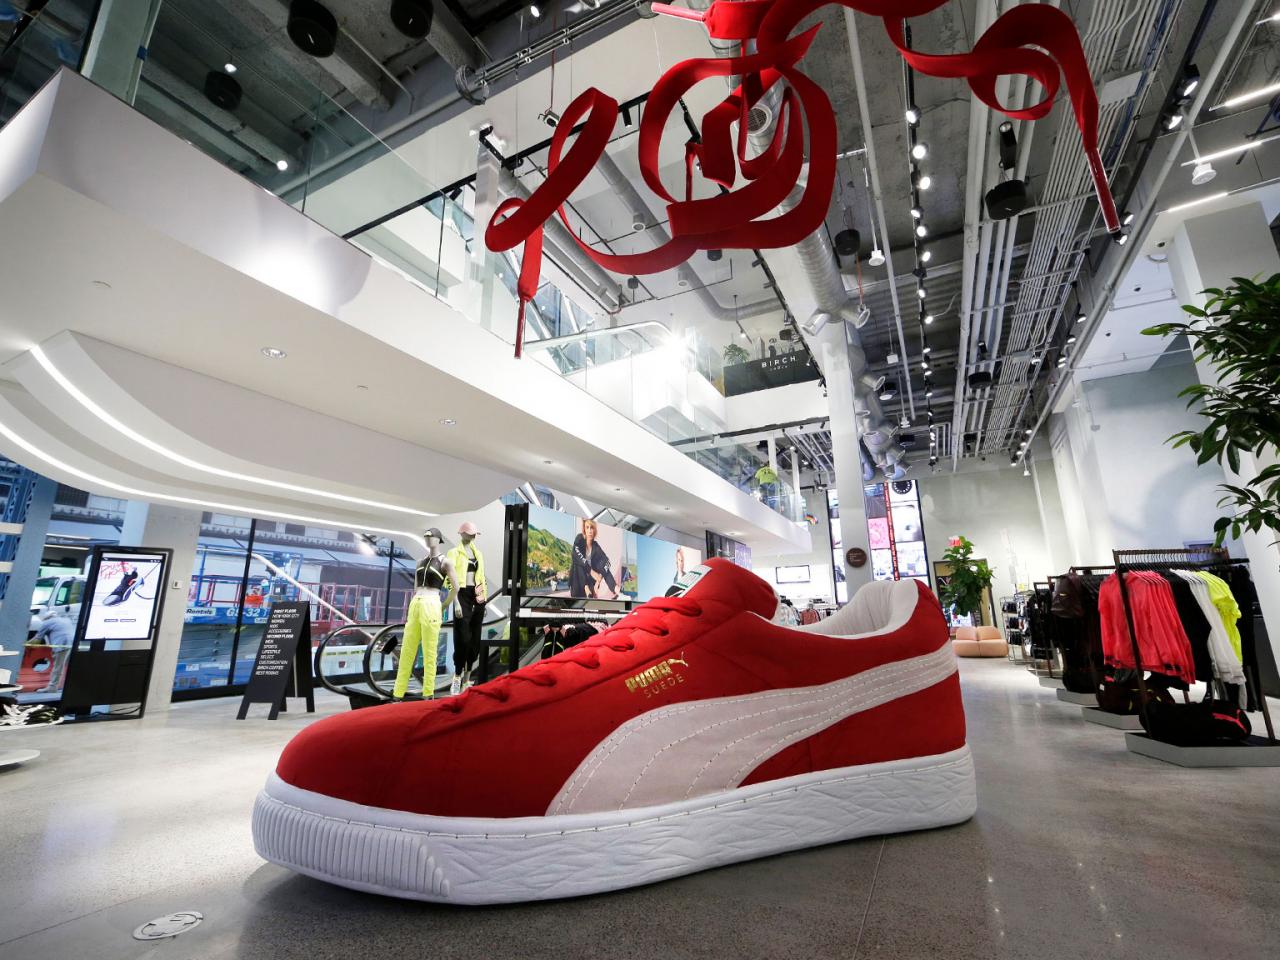 PUMA Store on Fifth Avenue in New York City